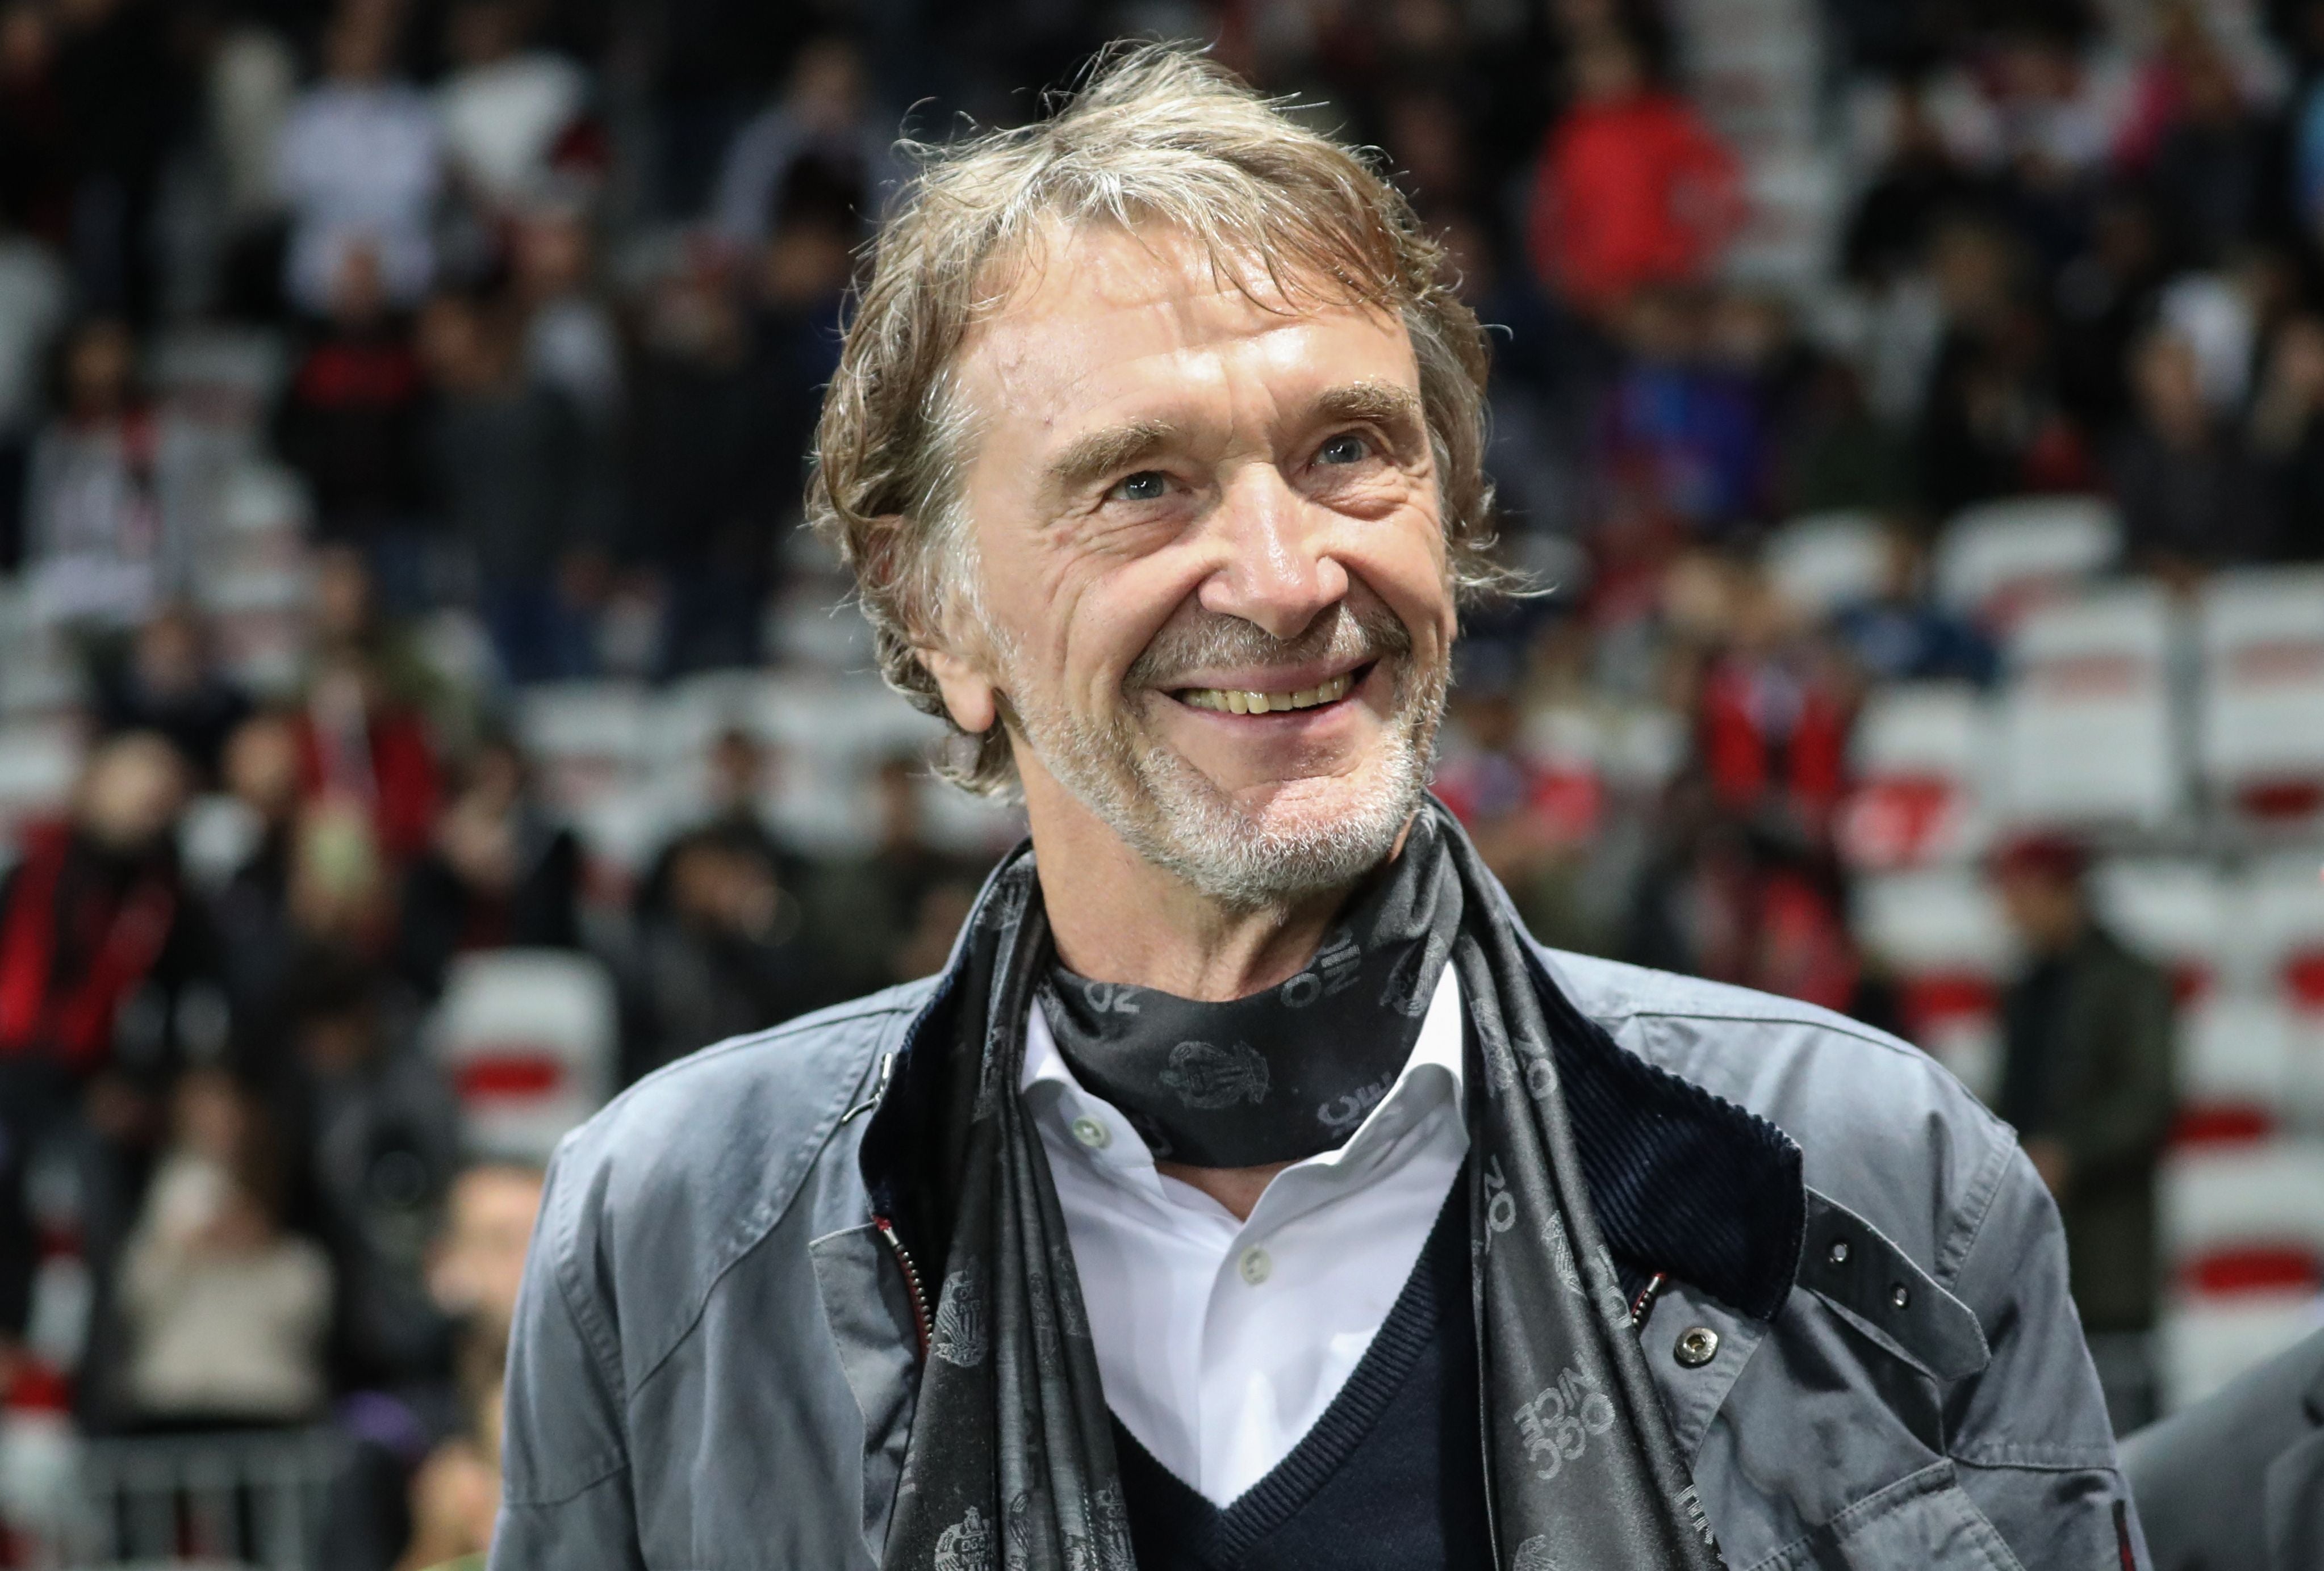 Jim Ratcliffe was reported to be a potential suitor after Roman Abramovich announced that Chelsea was for sale